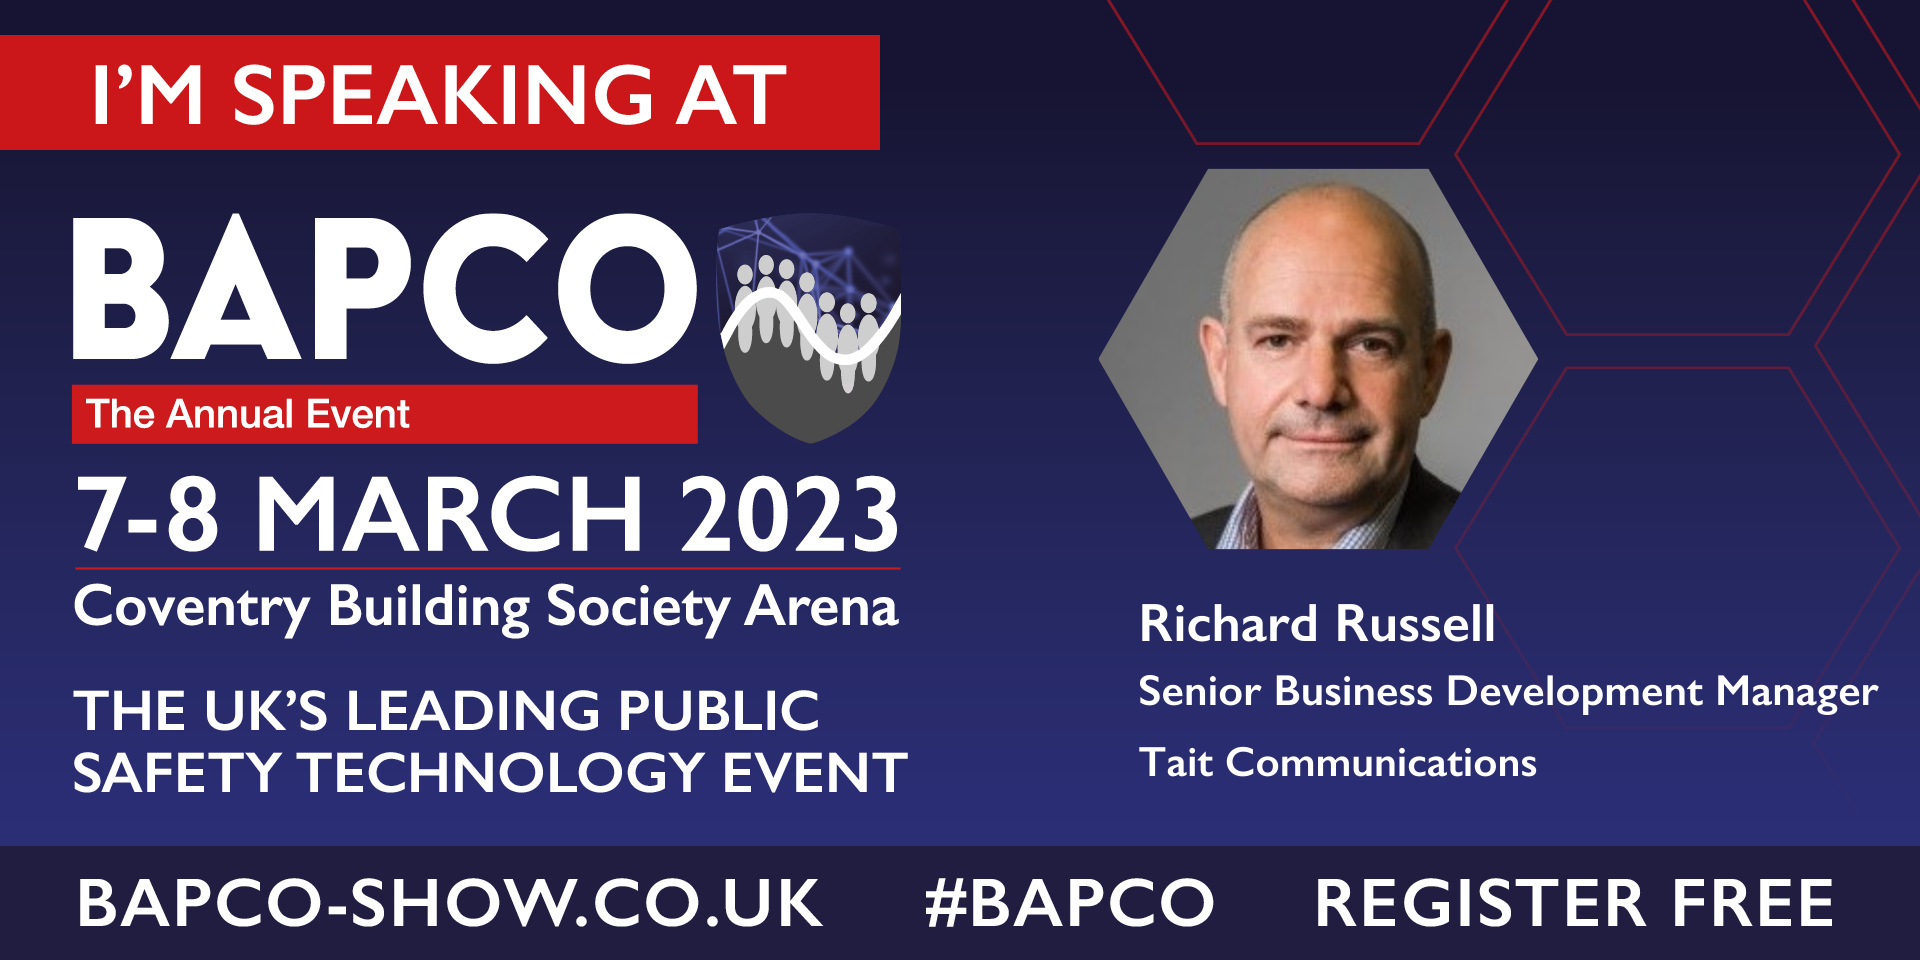 BAPCO Im speaking at -Richard Russell